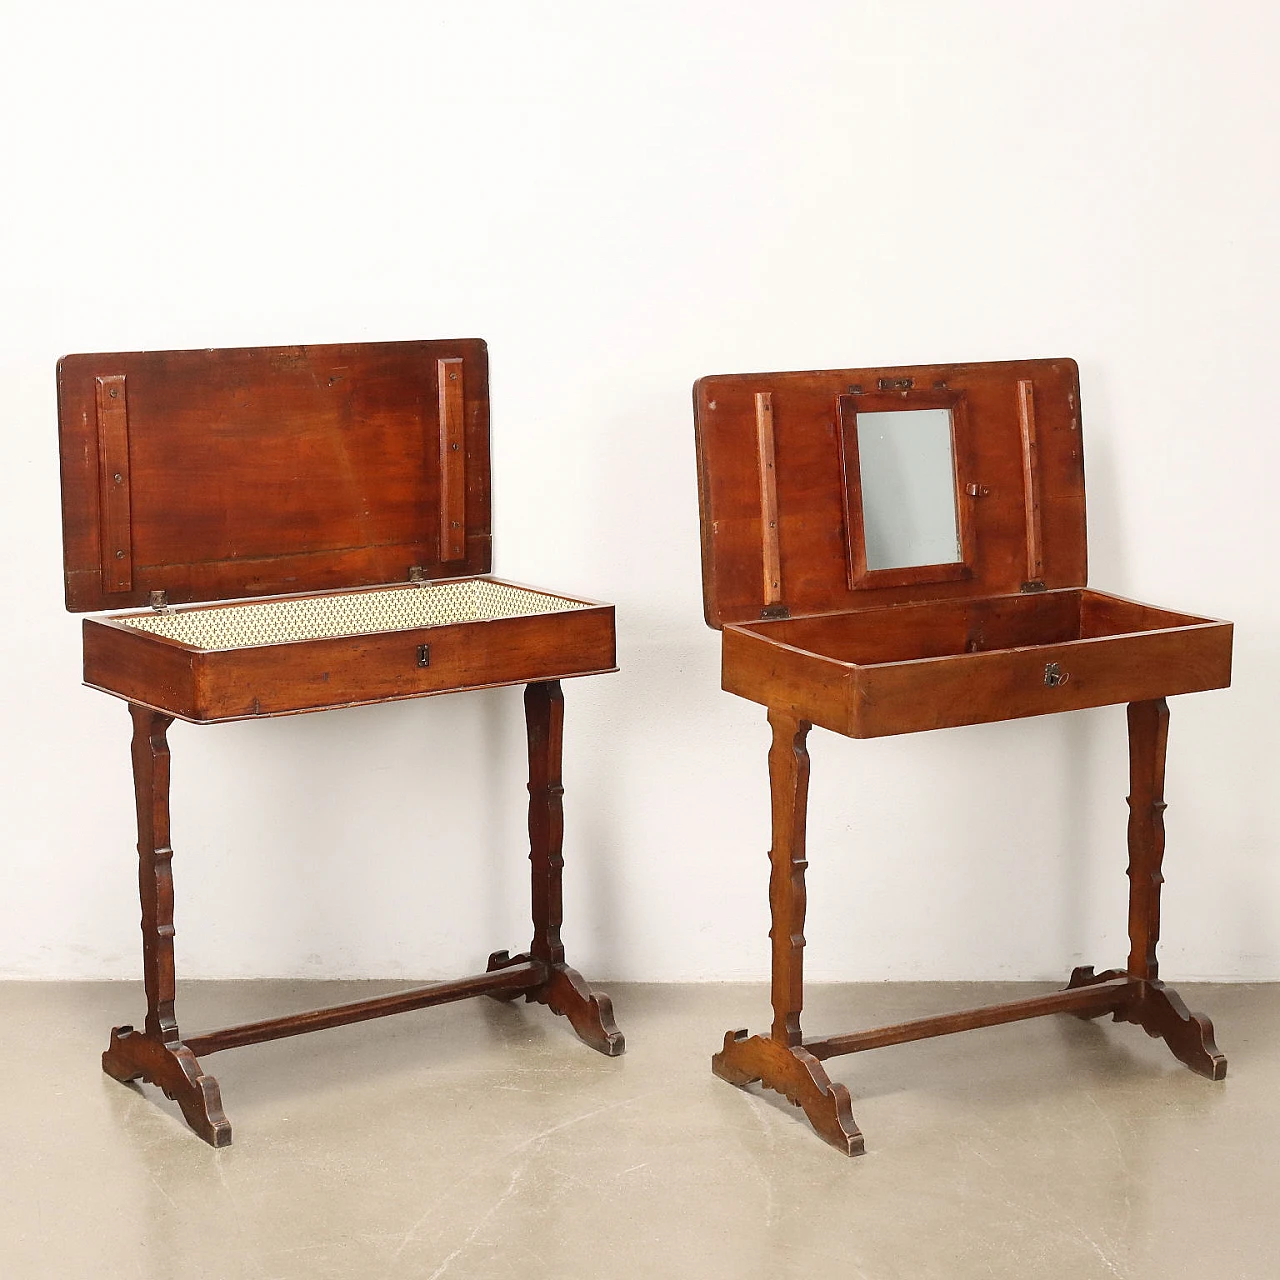 Pair of cherrywood working tables with opening tops, 19th century 3